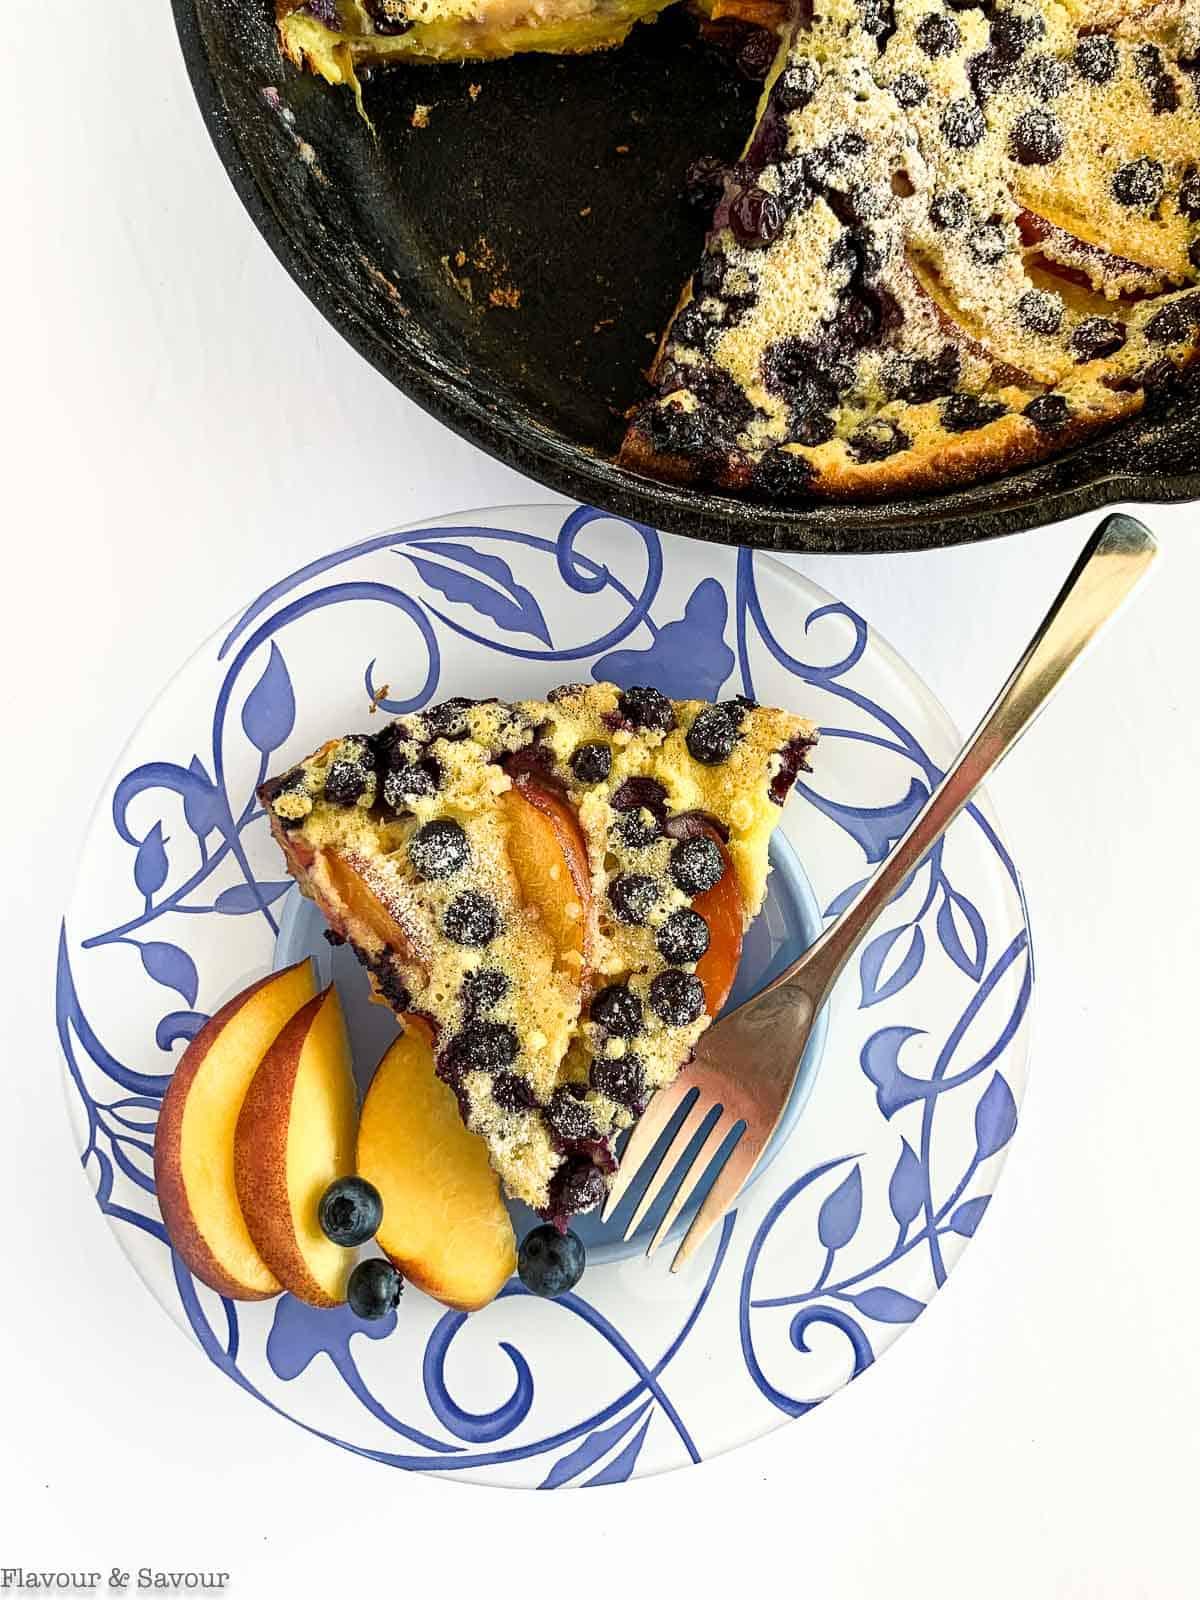 Overhead view of Gluten-Free Blueberry Peach Clafoutis on a plate beside a cast iron skillet